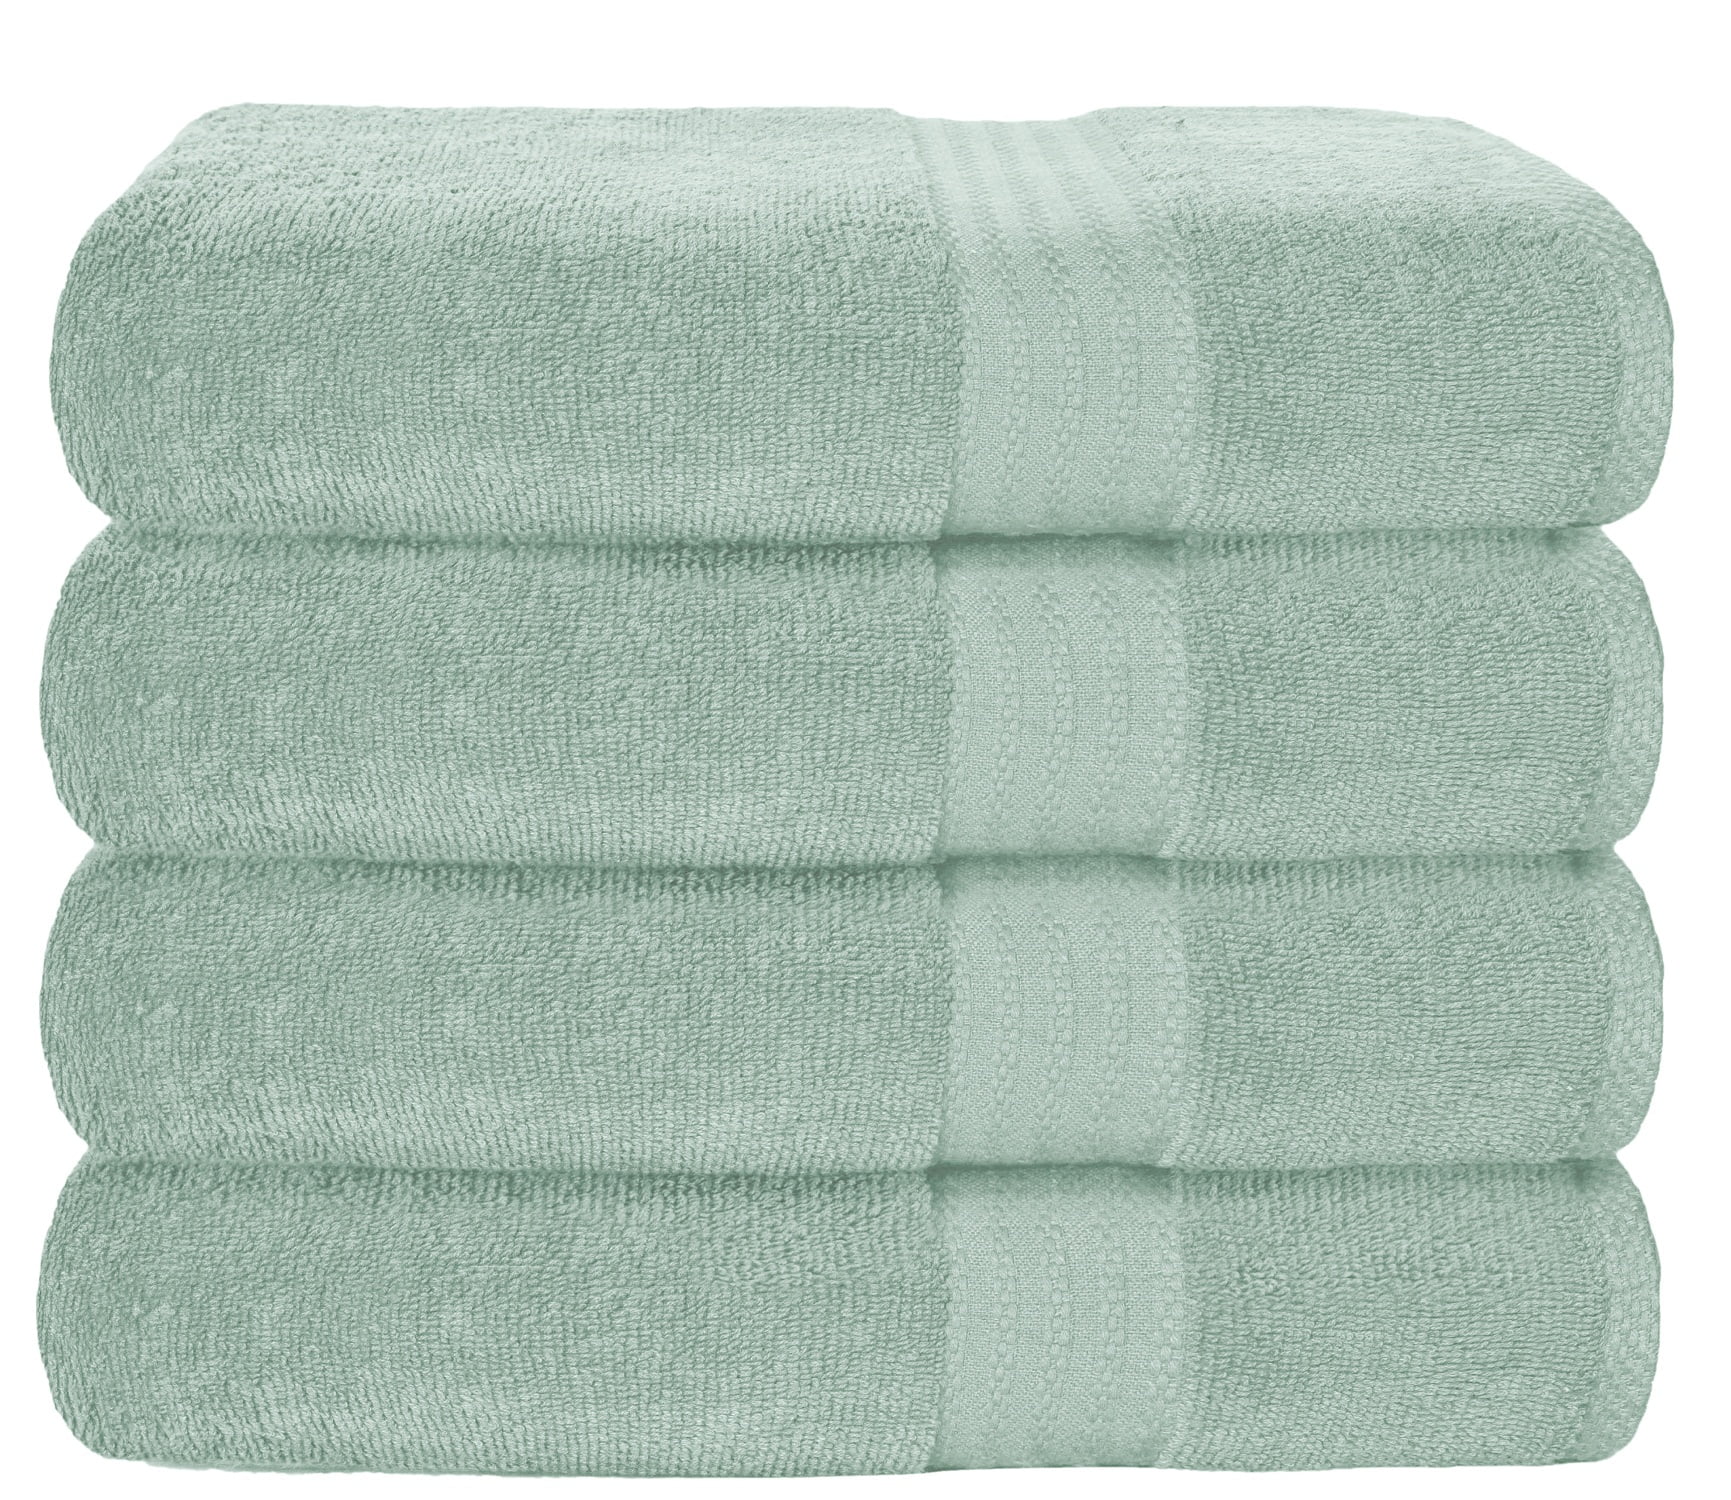 GLAMBURG Premium Cotton 4 Pack Bath Towel Set - 100% Pure Cotton - 4 Bath  Towels 27x54 - Ideal for Everyday use - Ultra Soft & Highly Absorbent - Sea  Green 